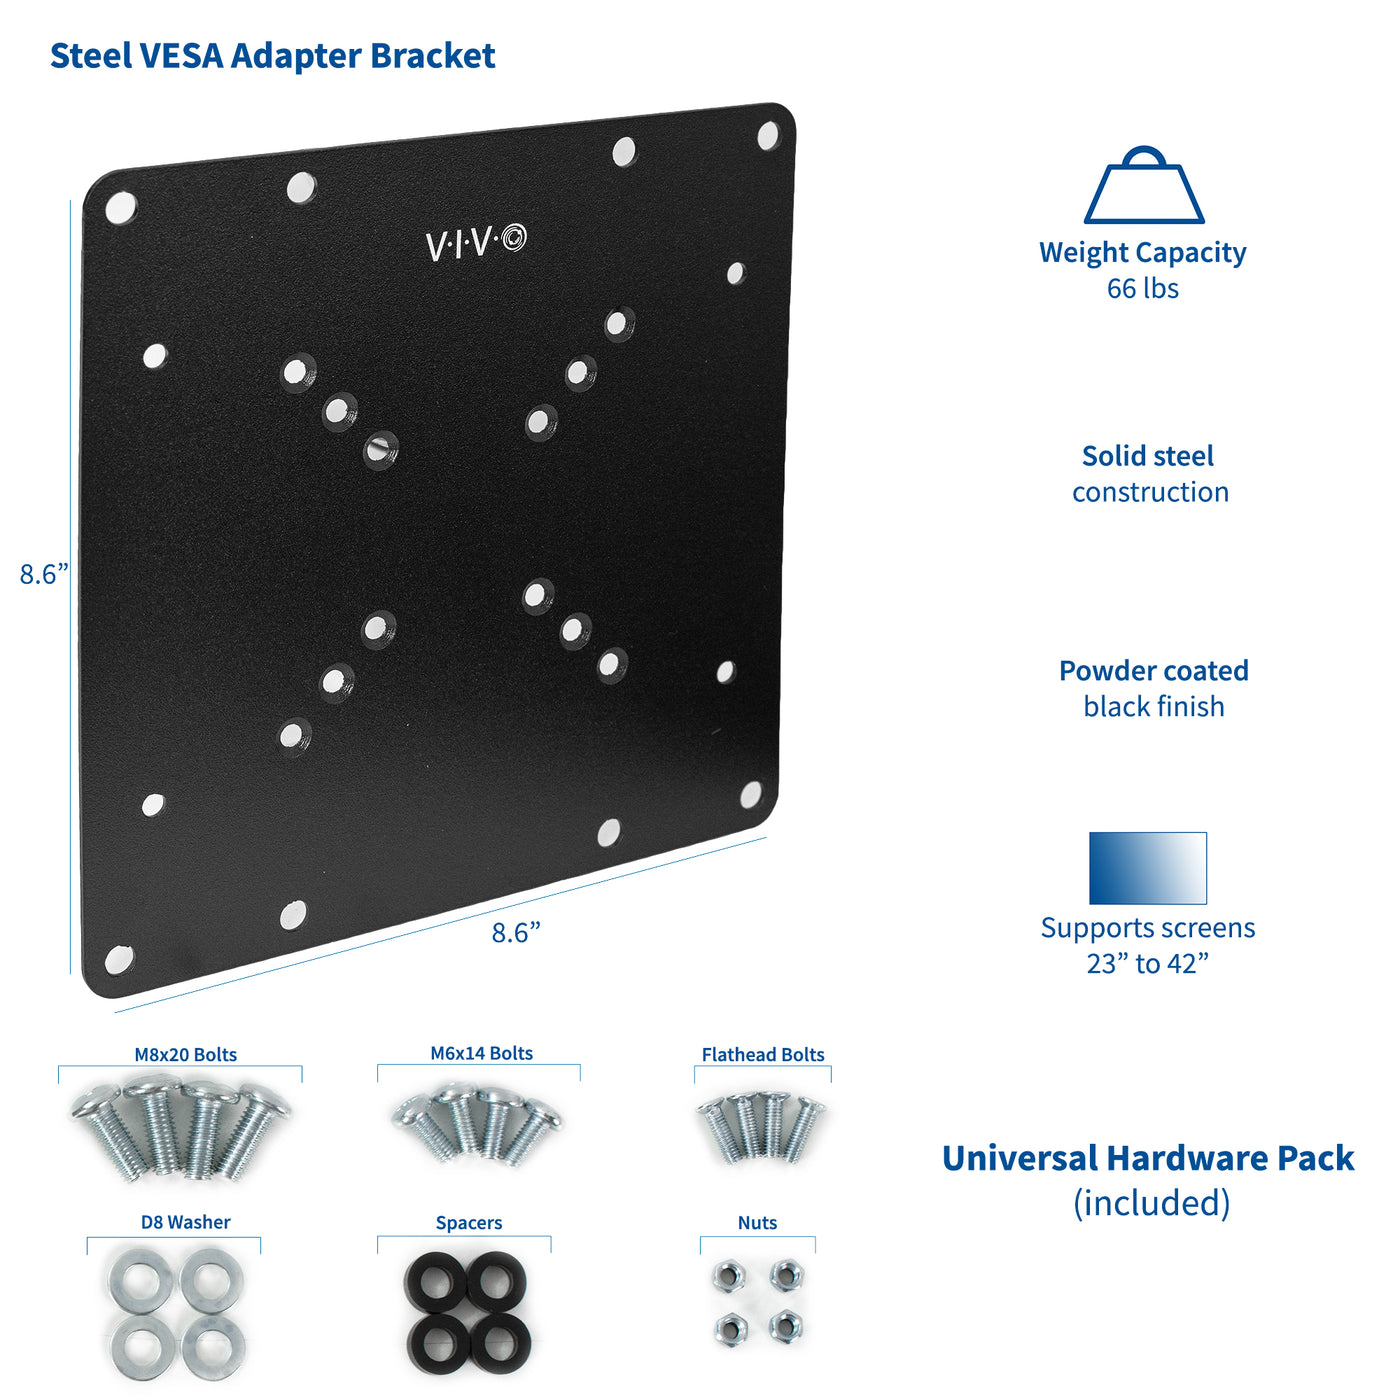 Hardwear included for steel VESA adapter to ensure universal use.